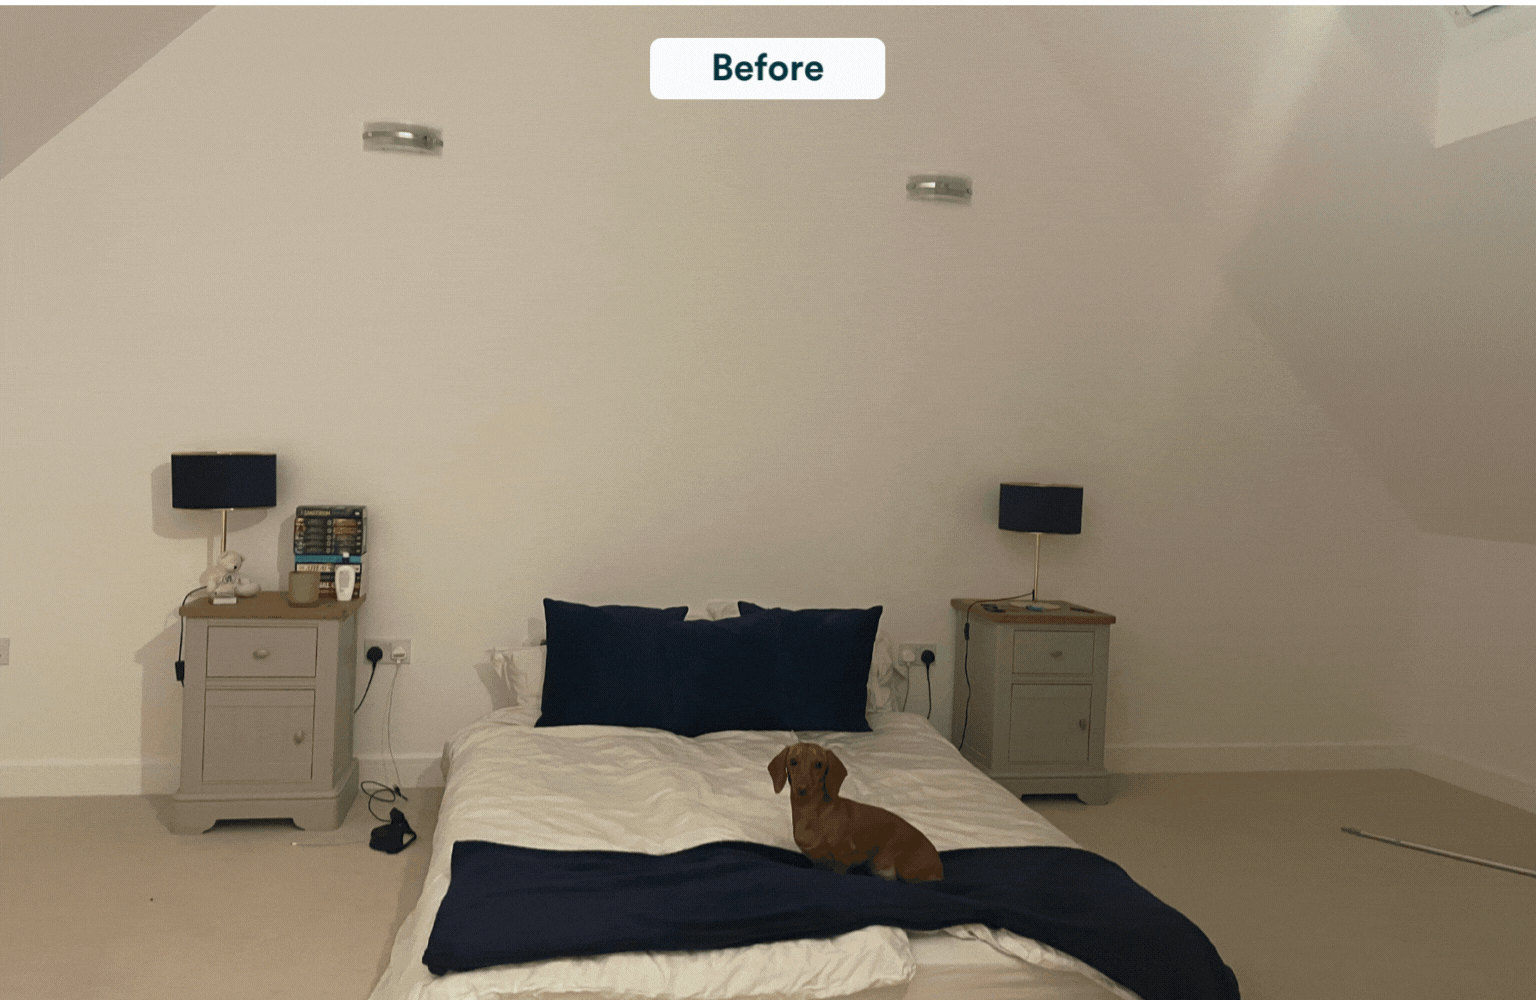 Modern loft bedroom before and after